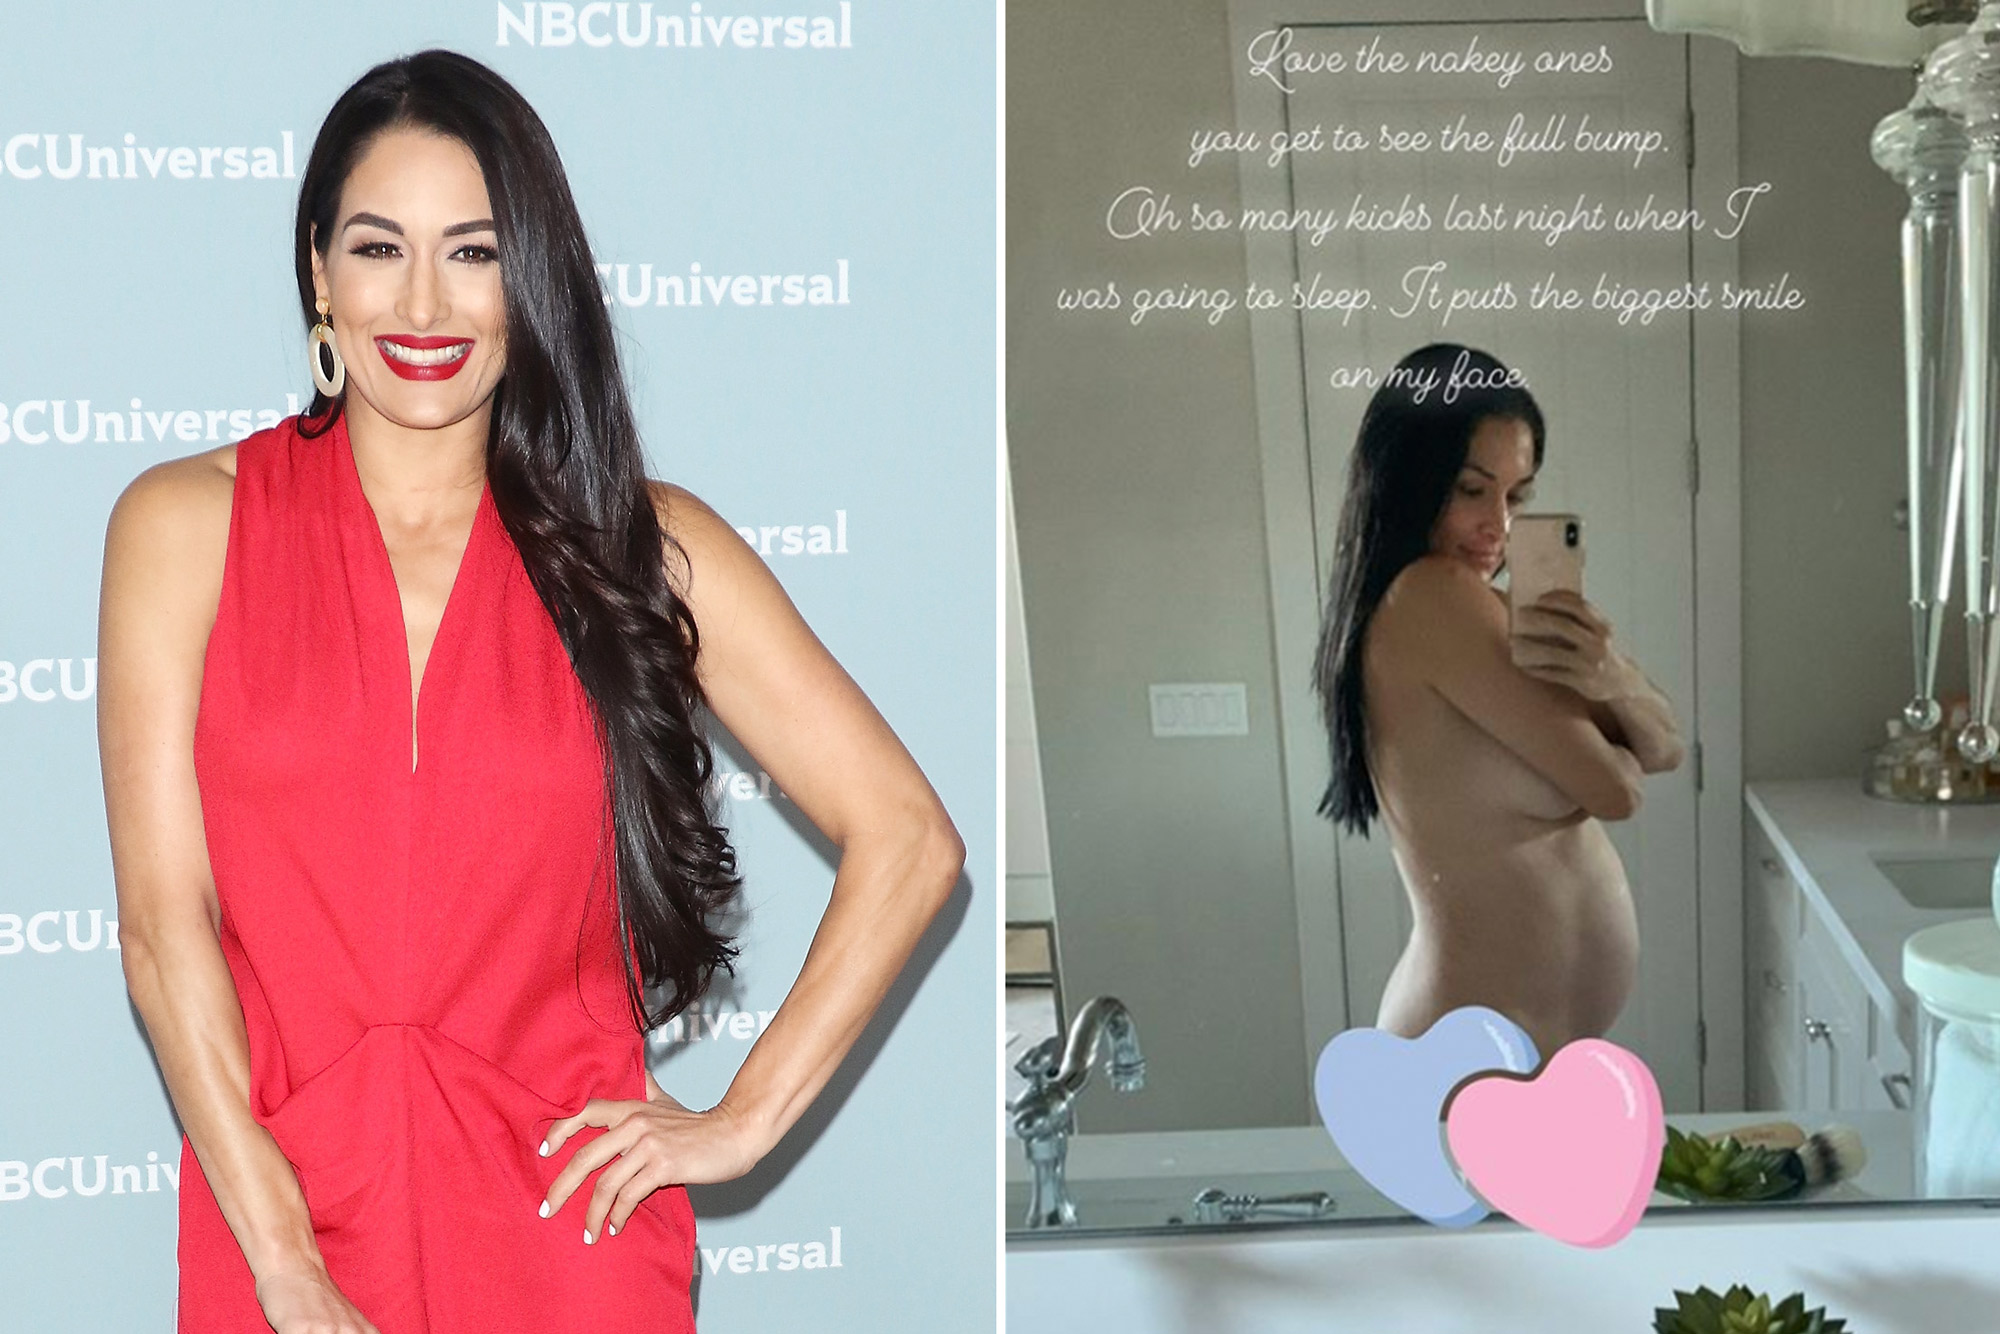 an thy recommends nikki bella naked pic